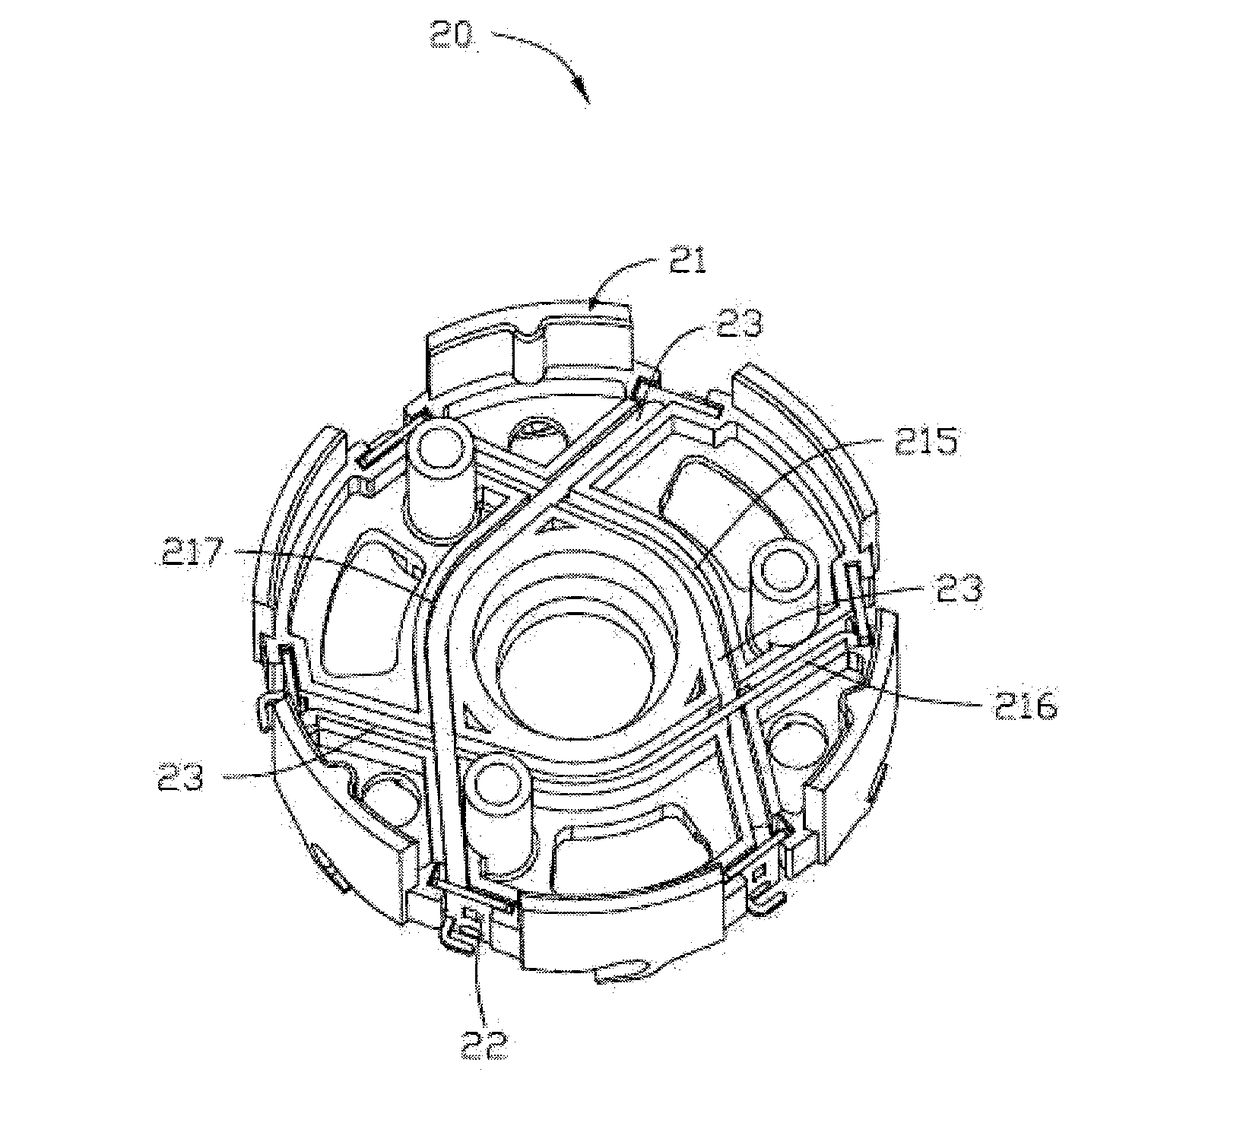 Endcap assembly for an electric motor and stator comprising same